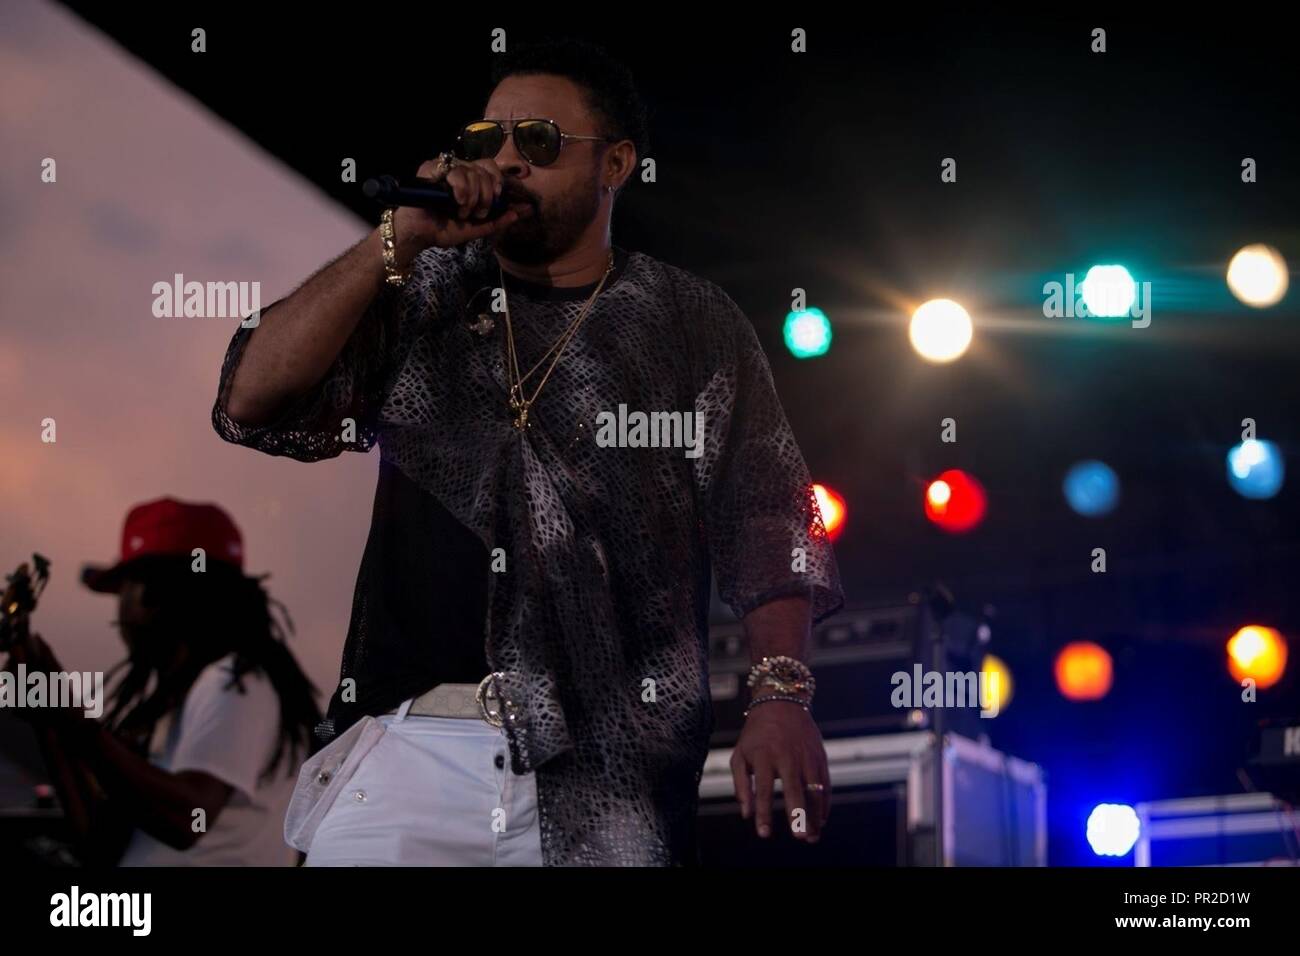 CAMP HANSEN, OKINAWA, Japan – Shaggy sings during a concert July 22 aboard Camp Hansen, Okinawa, Japan. The free concert was open to military and local communities. Shaggy, a former field artillery cannon crewmember for the Marine Corps, is now a Jamaican-American reggae fusion singer and DJ. Stock Photo